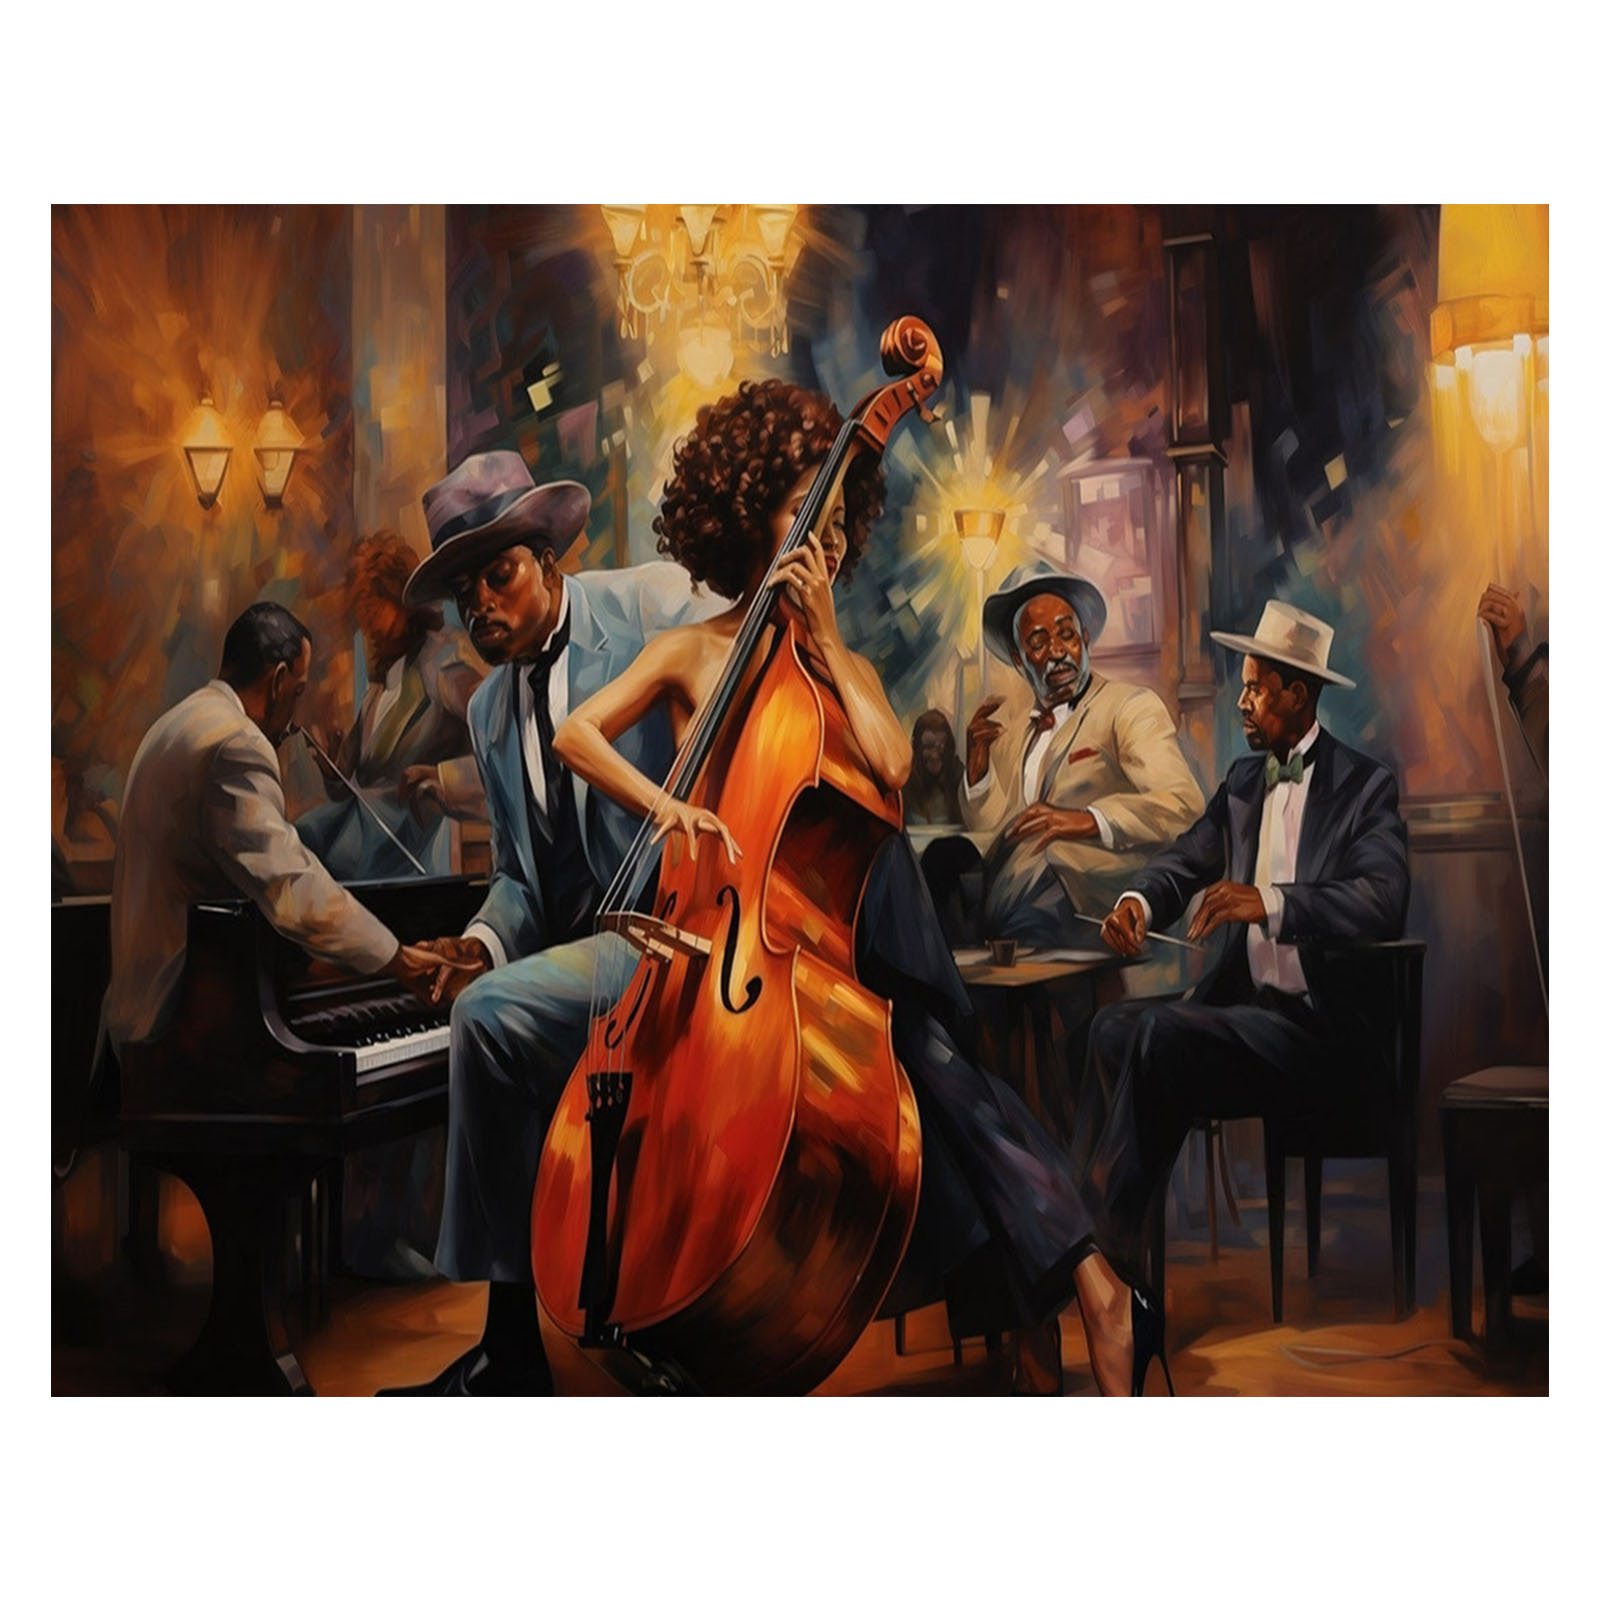 

Canvas Art Print - African American Music Theme, Waterproof Soft Canvas Material, Unframed Vibrant Acoustic Wall Decor For Living Room, Bedroom, Office - Unique Black Culture Poster 12x18inch